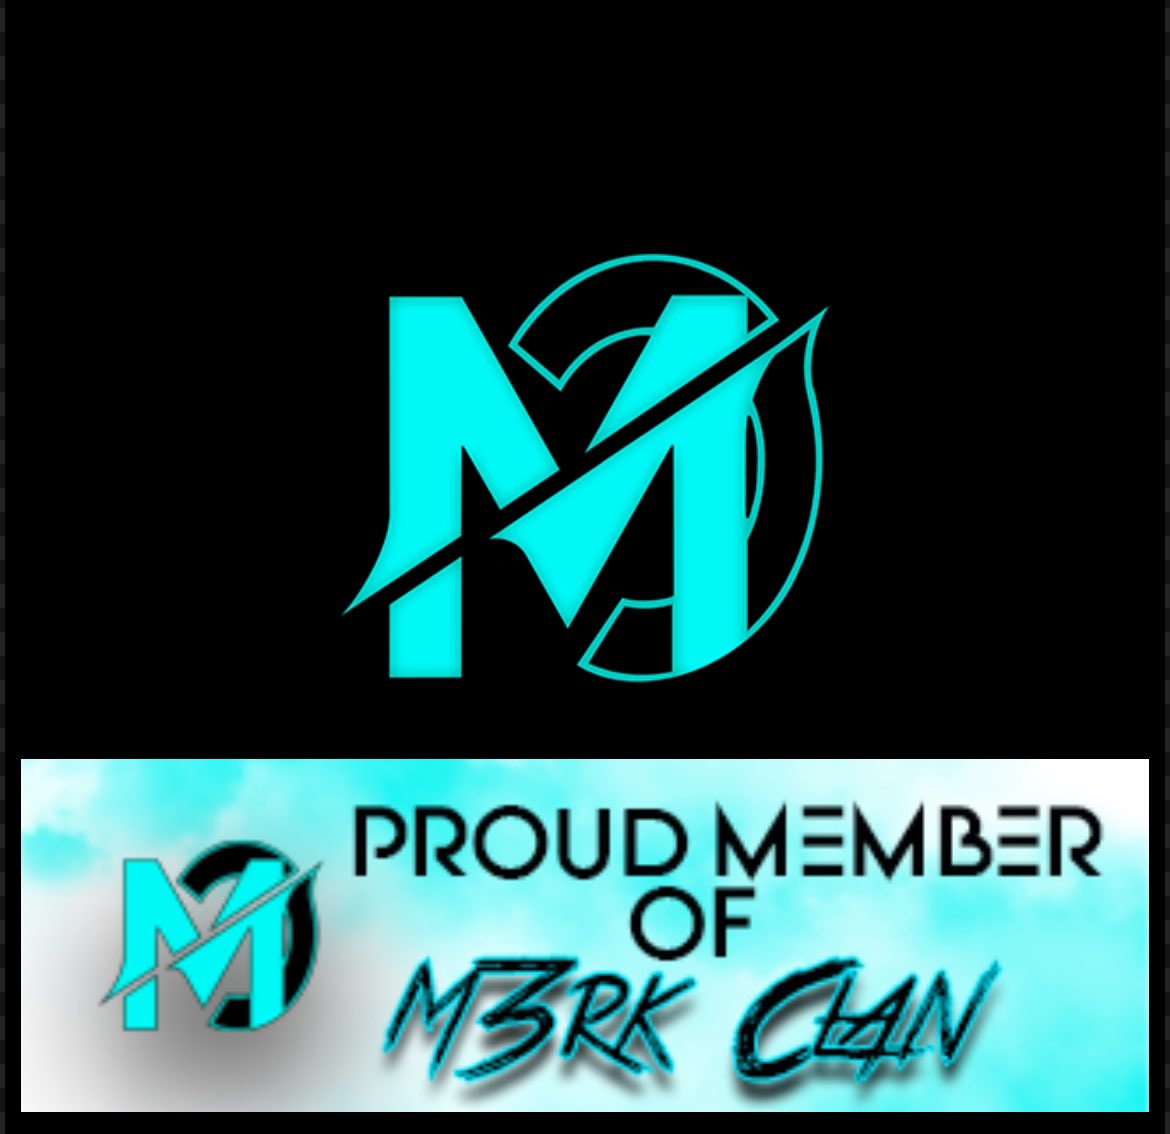 Incredibly Proud to announce I am officially a member of @M3RKCLANGAMING ‼️ I’ve seen the environment and atmosphere this community has to offer and I am excited to be apart of the family The Streaming and Content Creating Grind just got taken to another level💪🏼💪🏼💪🏼